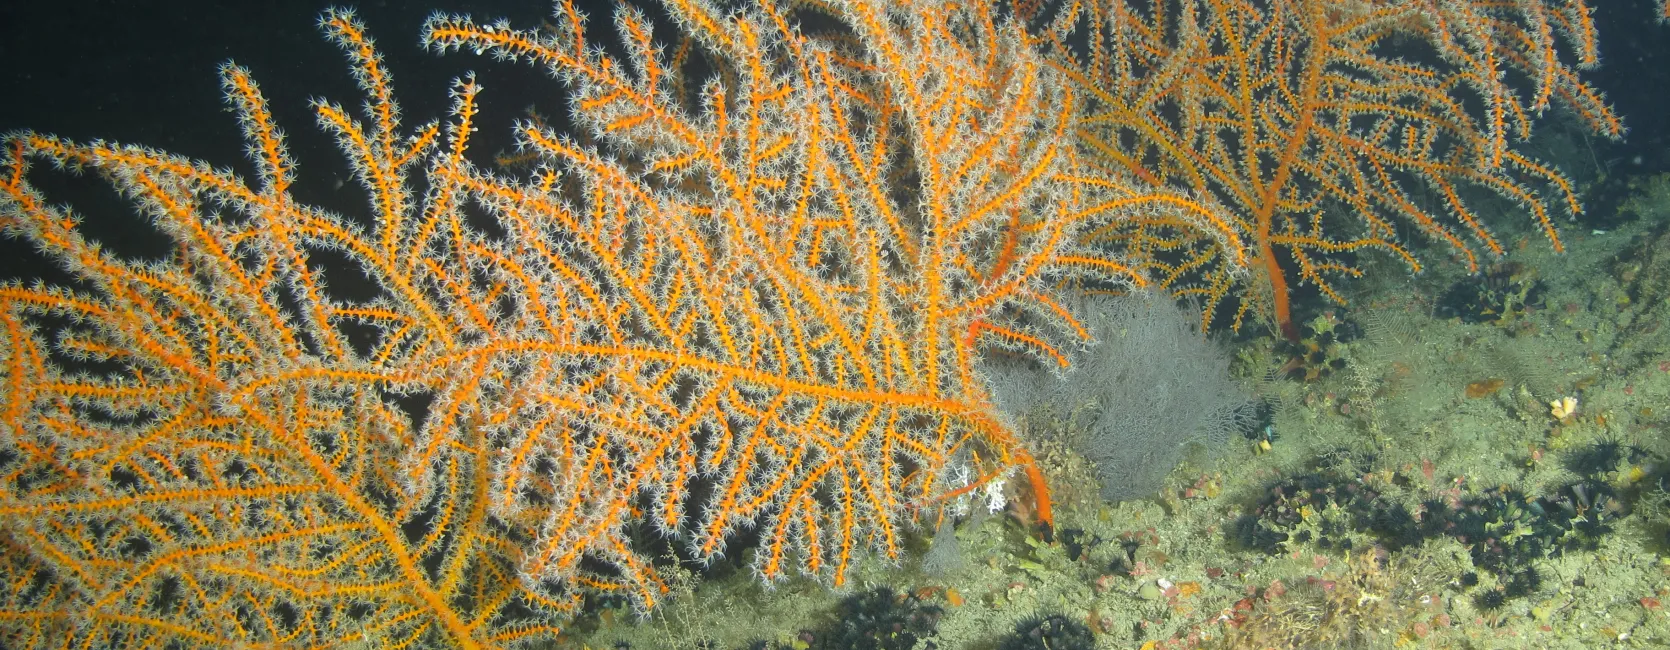 A cluster of orange branching soft corals growing against a black background of the deep sea floor.